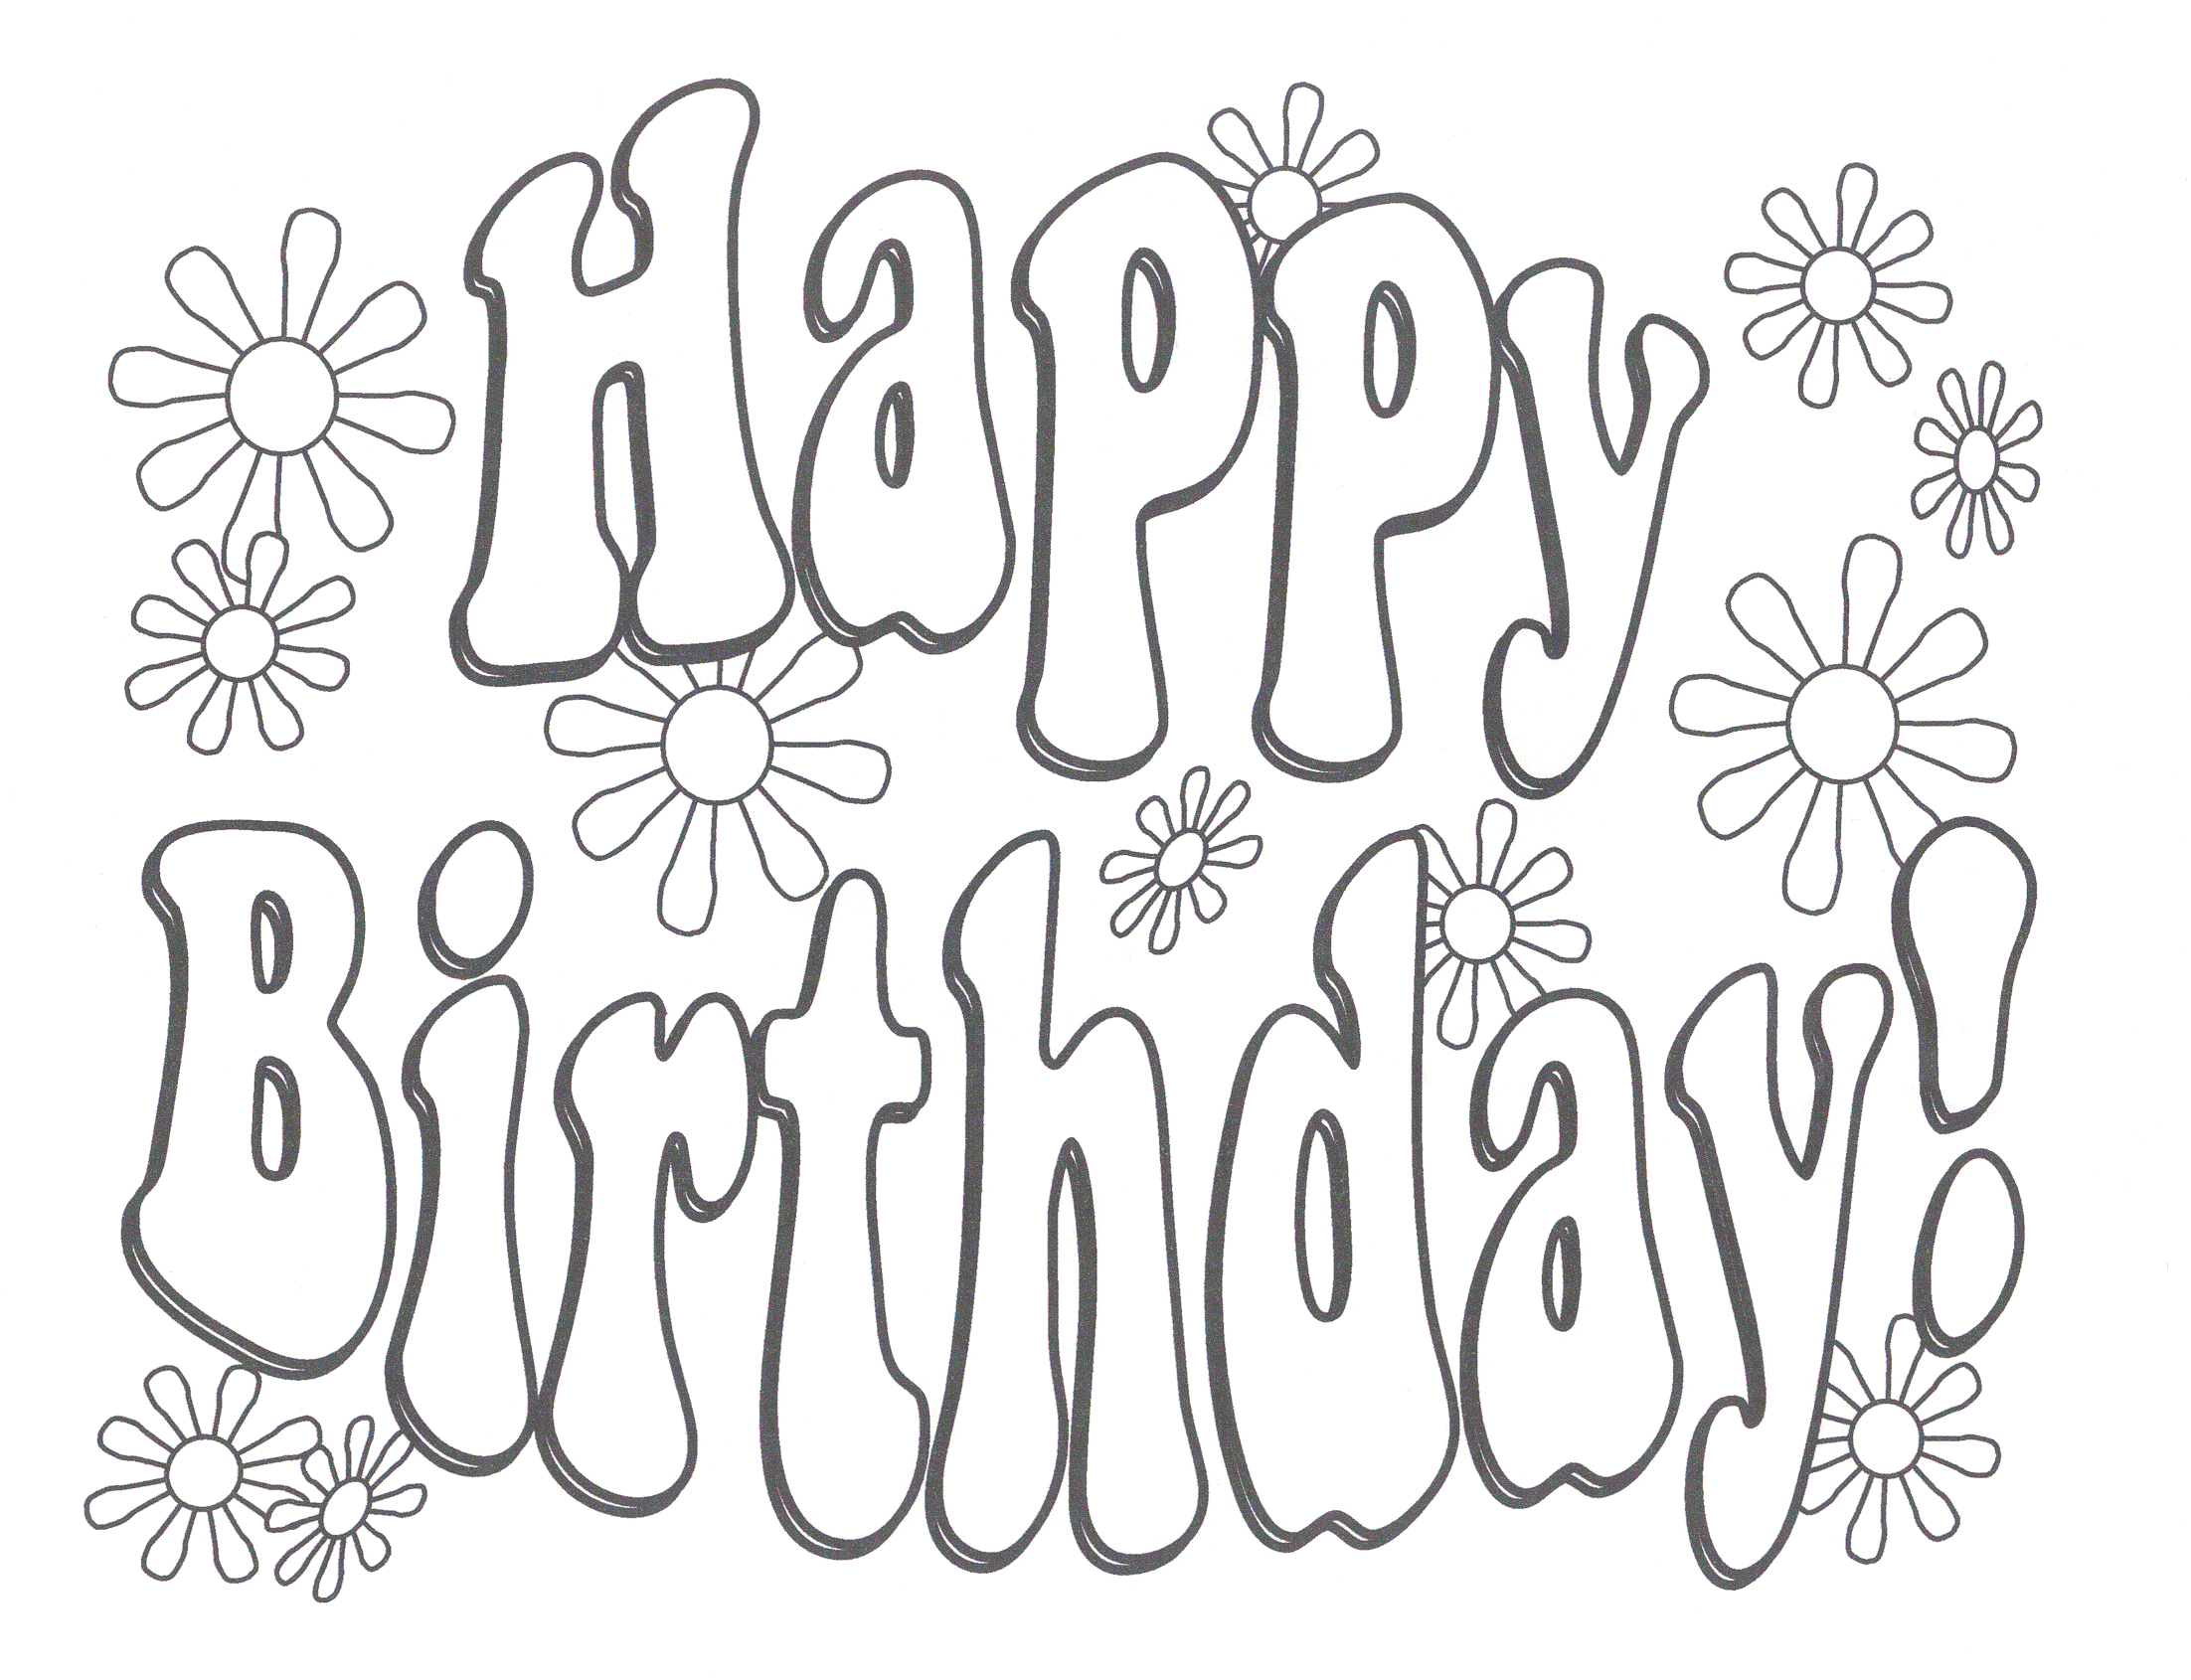 Amazing of Beautiful Tigger Birthday Cake Coloring Page F #1656